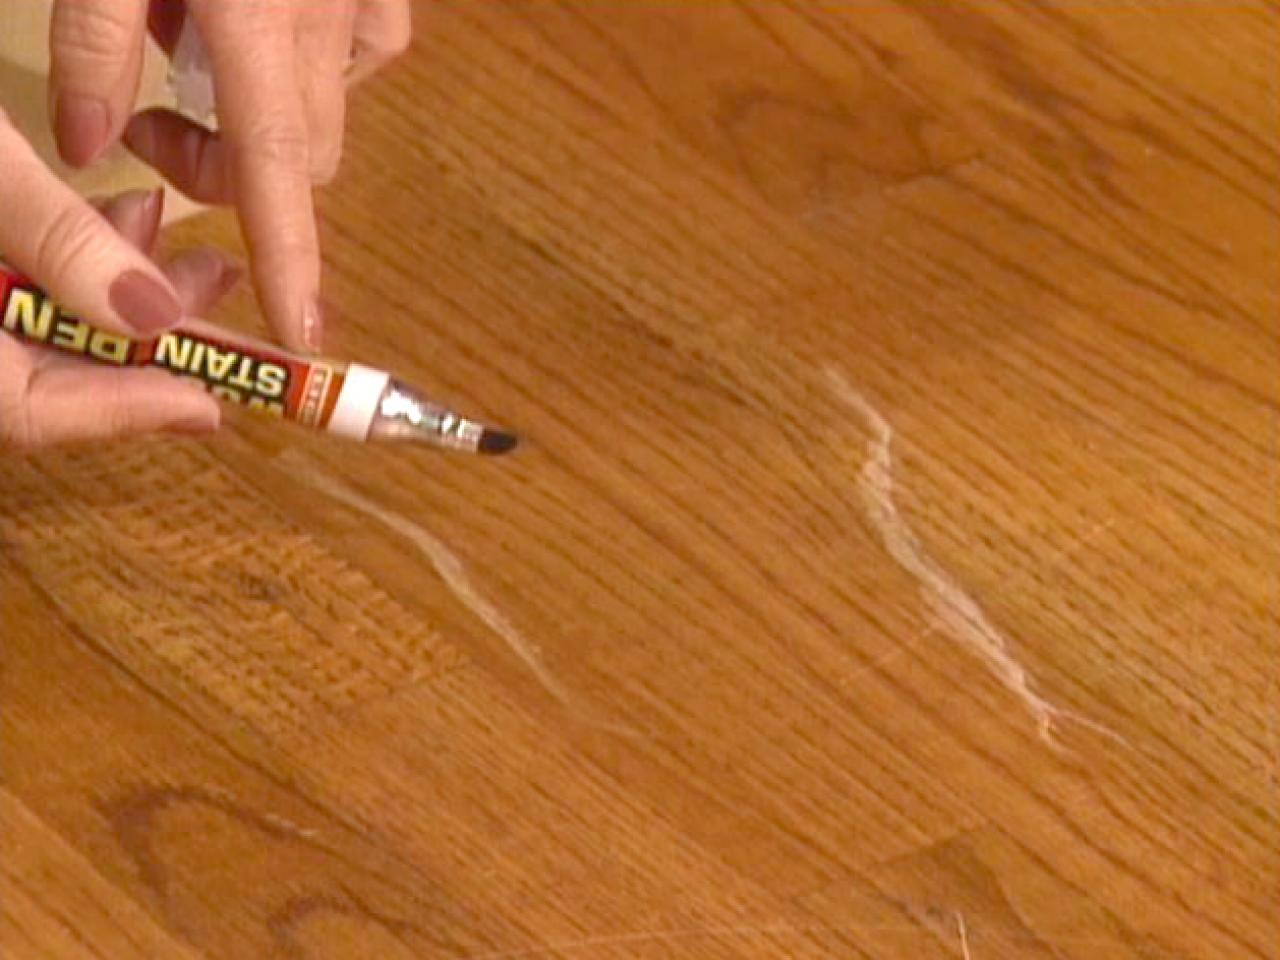 How To Touch Up Wood Floors Tos Diy, How To Remove Dog Nail Scratches From Hardwood Floors